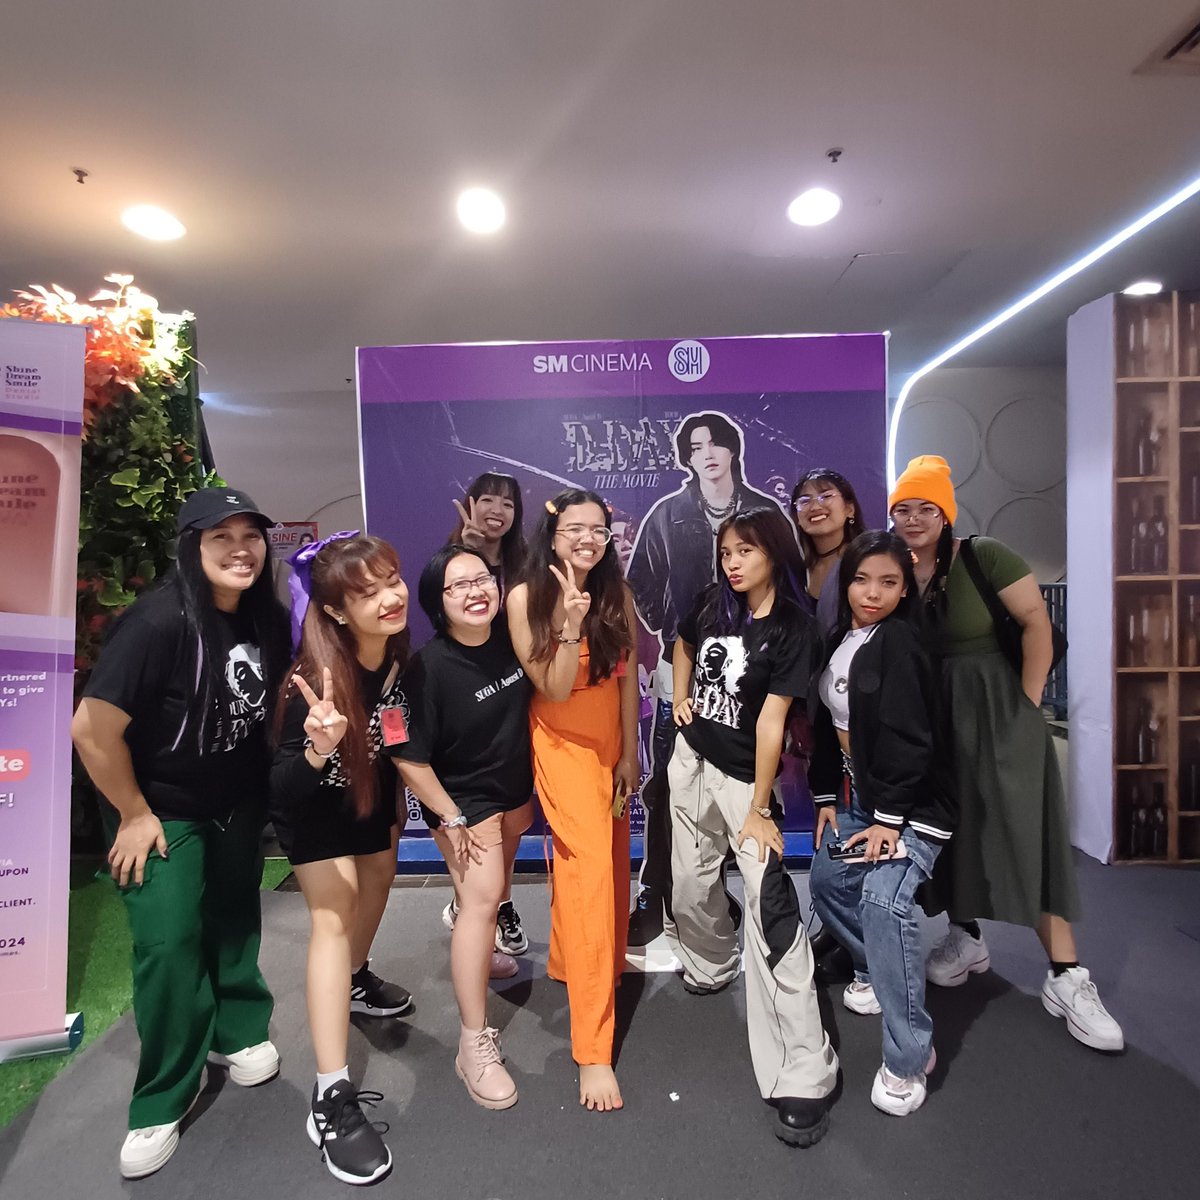 Another memorable experience with my ARMY friends! Thank you @army_cavite 💜💜💜 #DDAY_ACFinSMBacoor